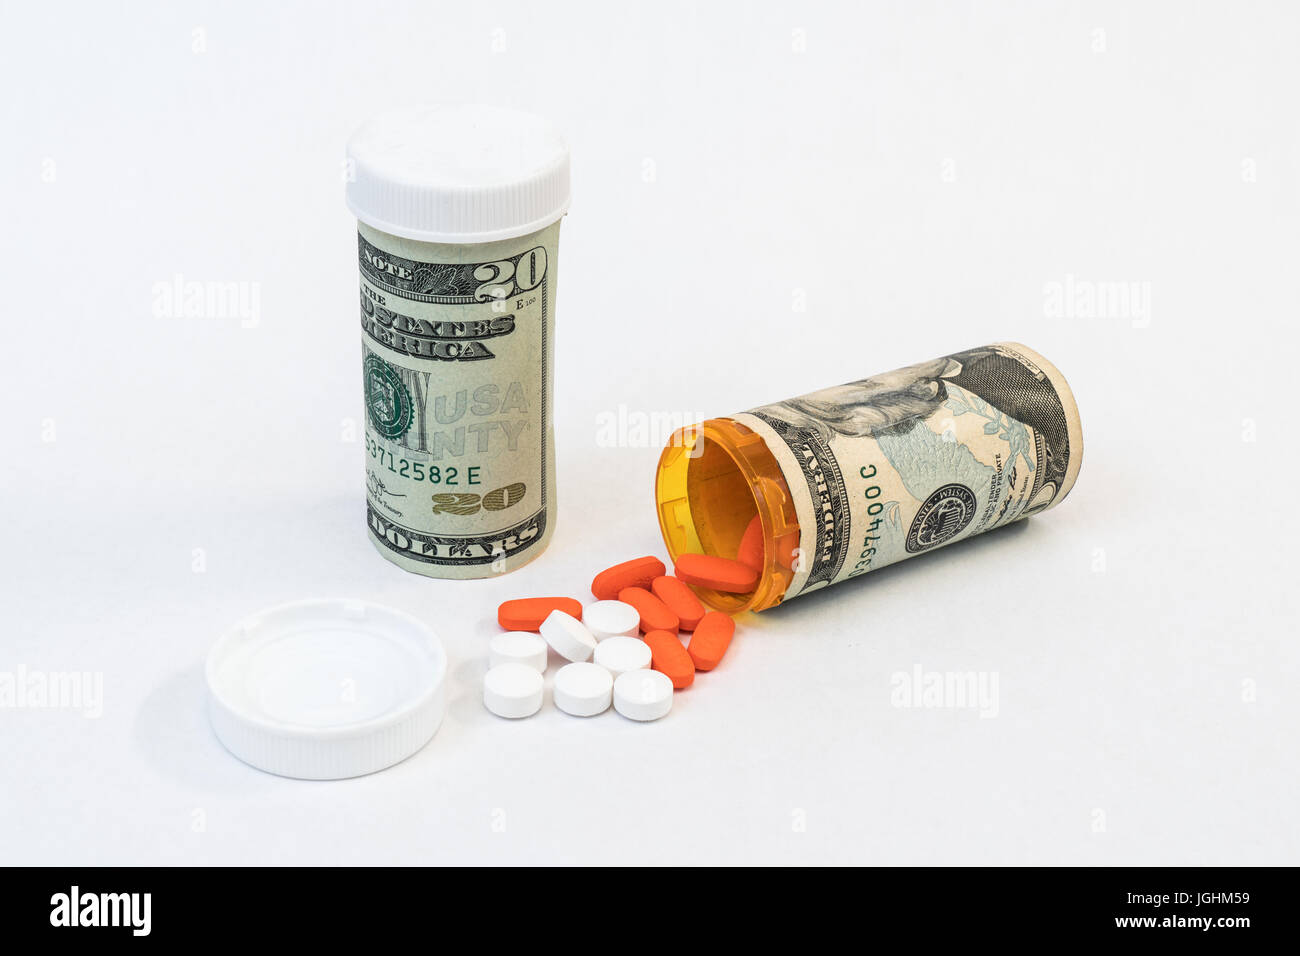 Prescription Medication Bottles and pills with wrapped in money signifying high cost. Stock Photo